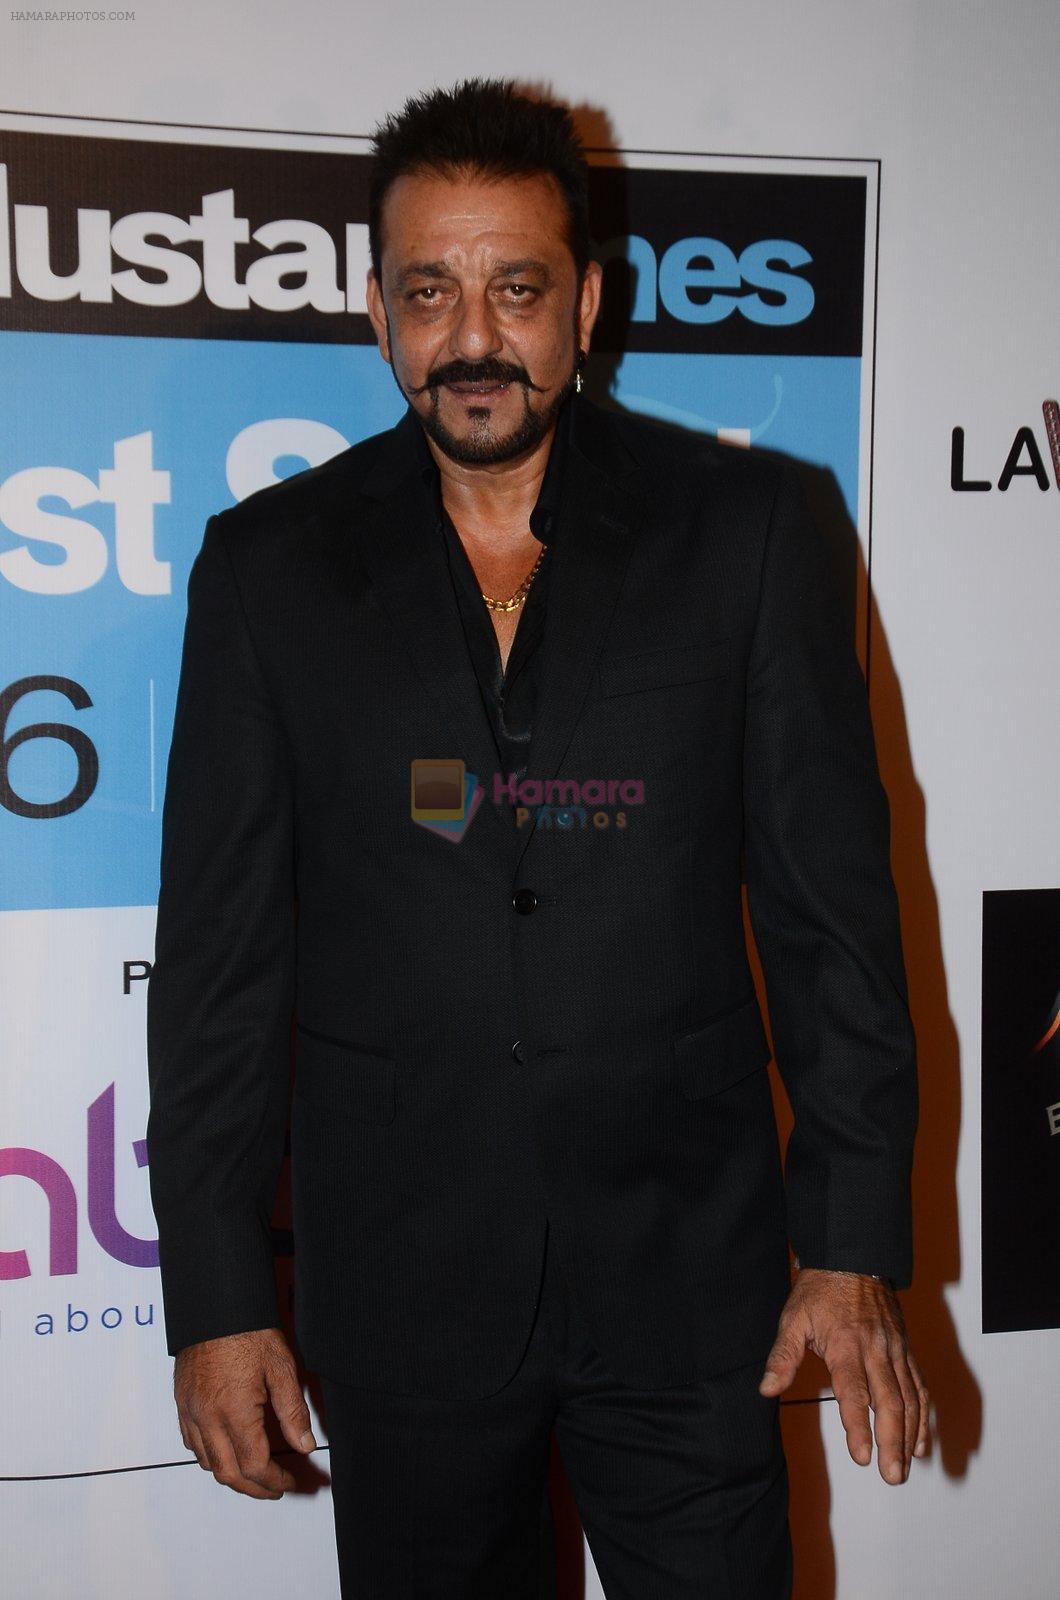 Sanjay Dutt at HT Most Stylish on 20th March 2016